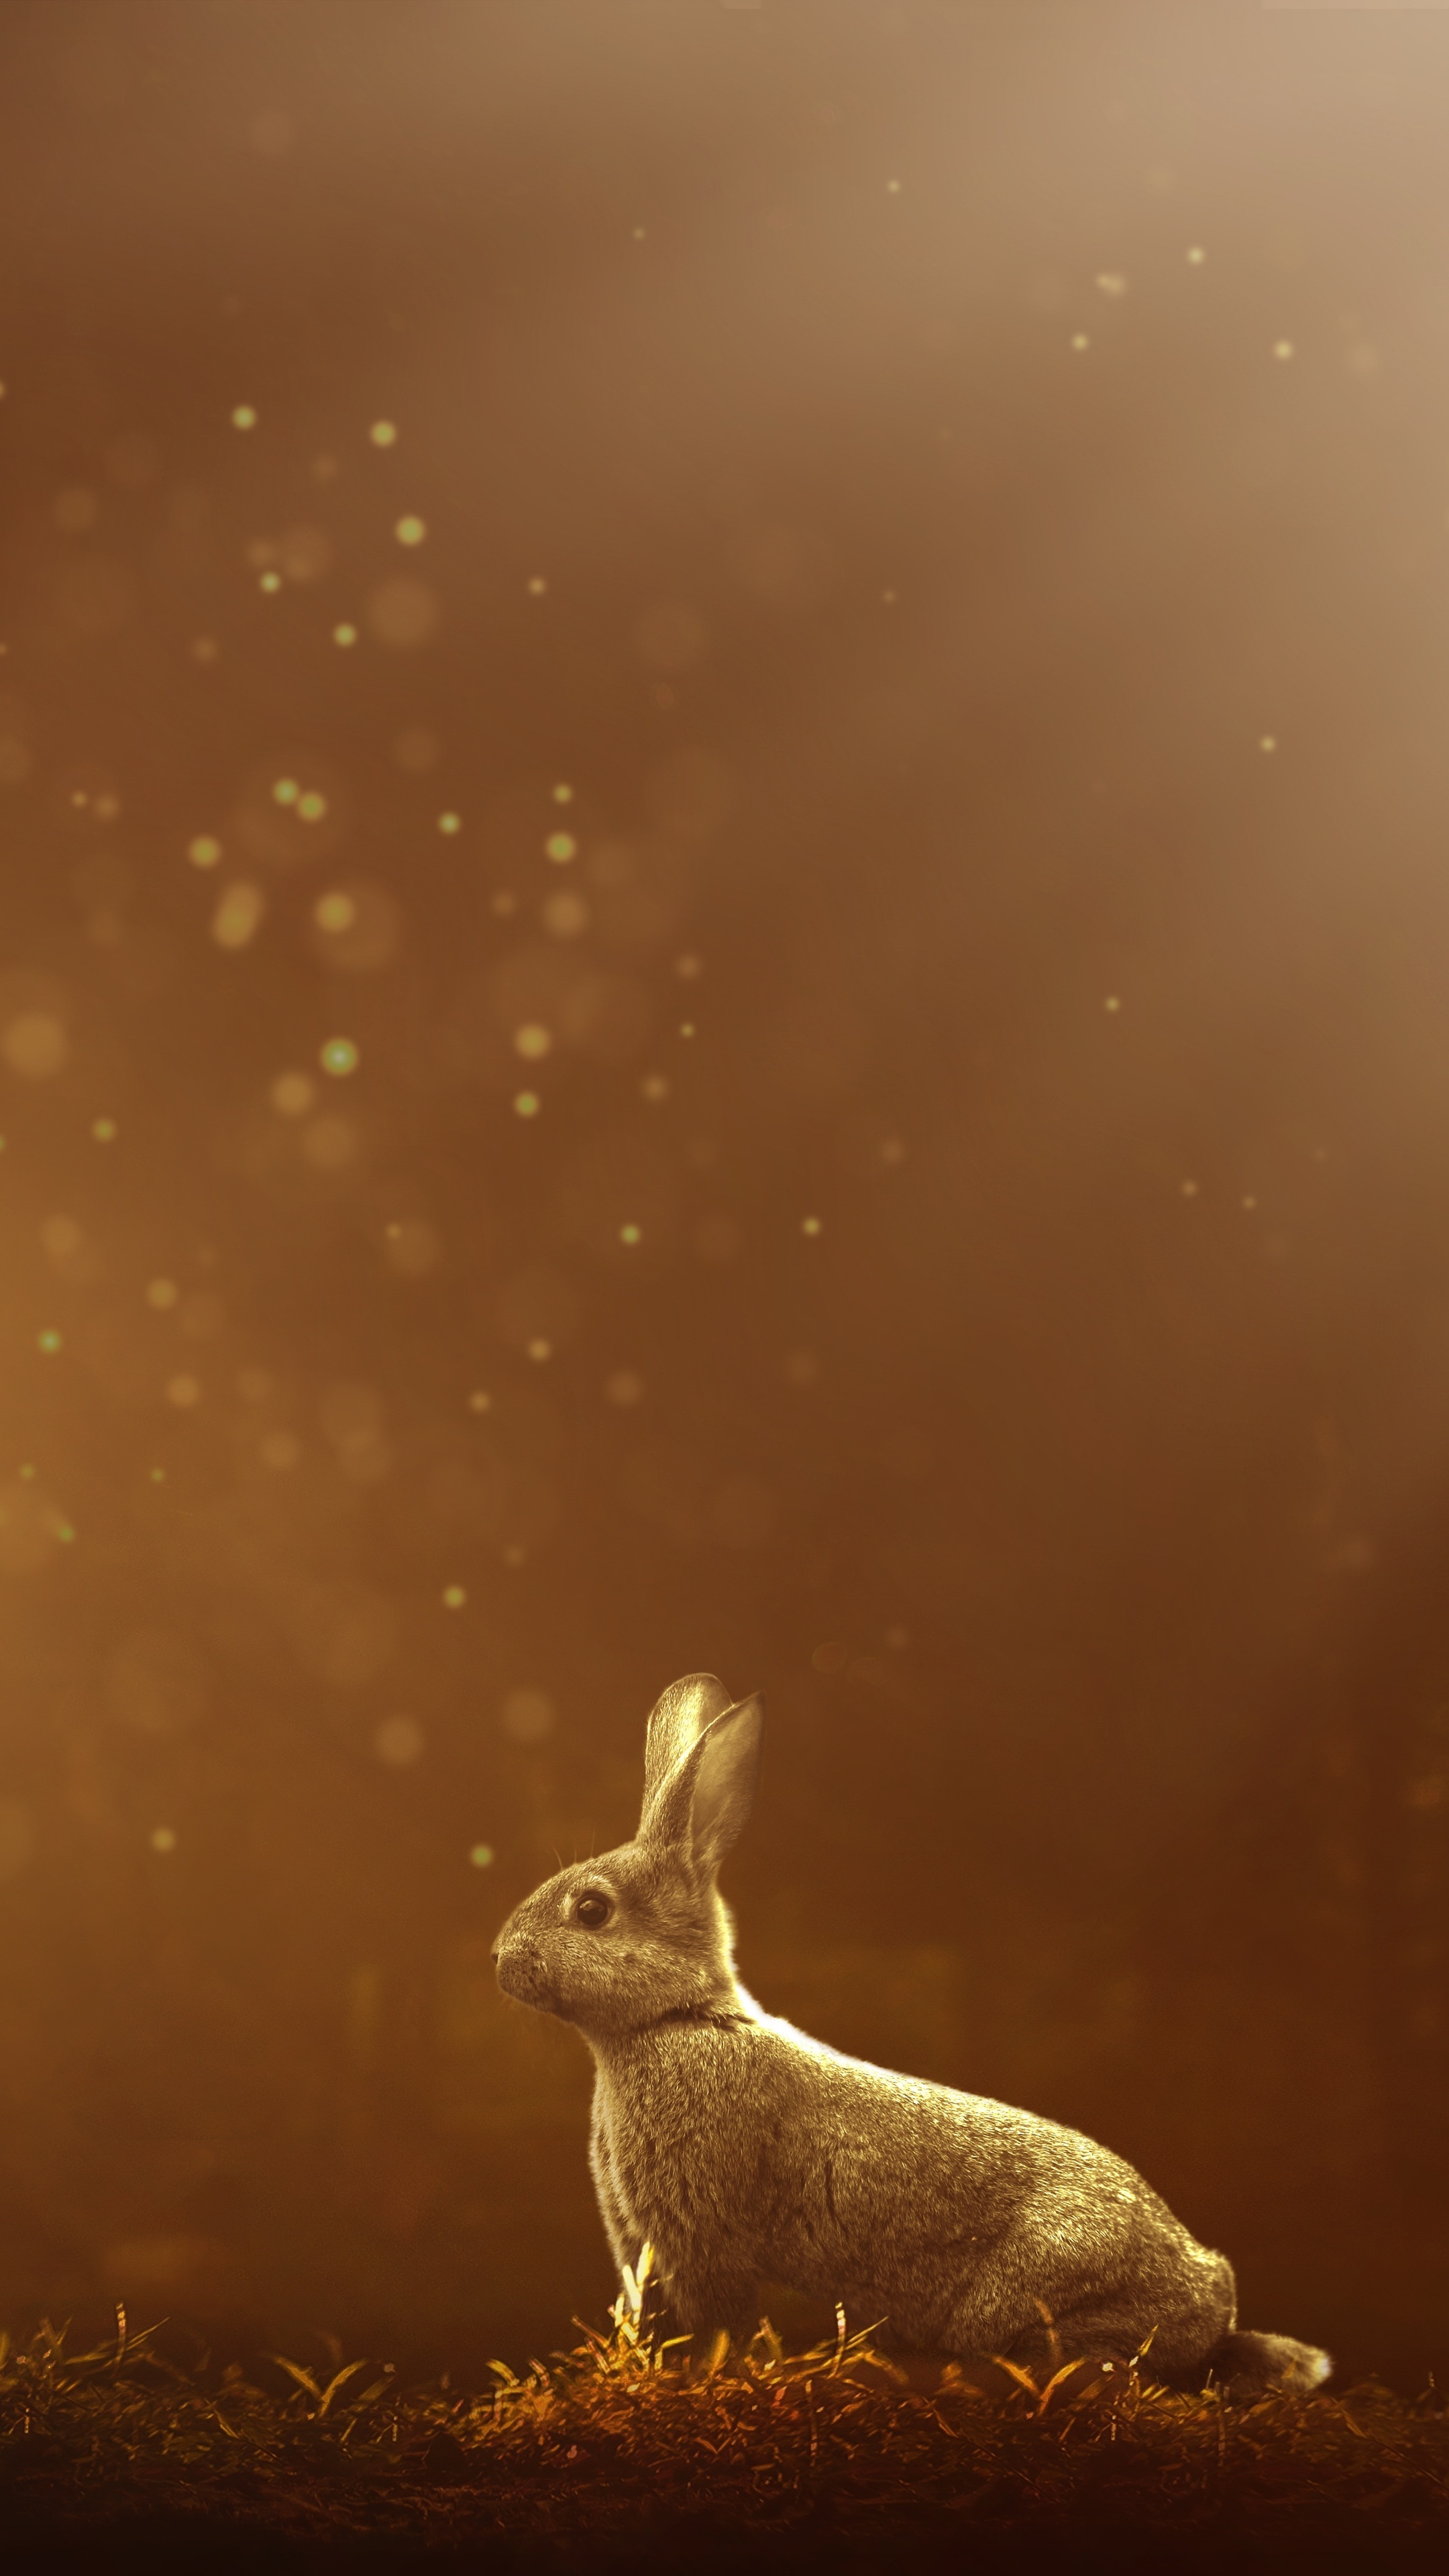 Rabbit wallpapers, Sony Xperia wallpapers, HD/4K images, Stunning bunny pictures, 2160x3840 4K Phone